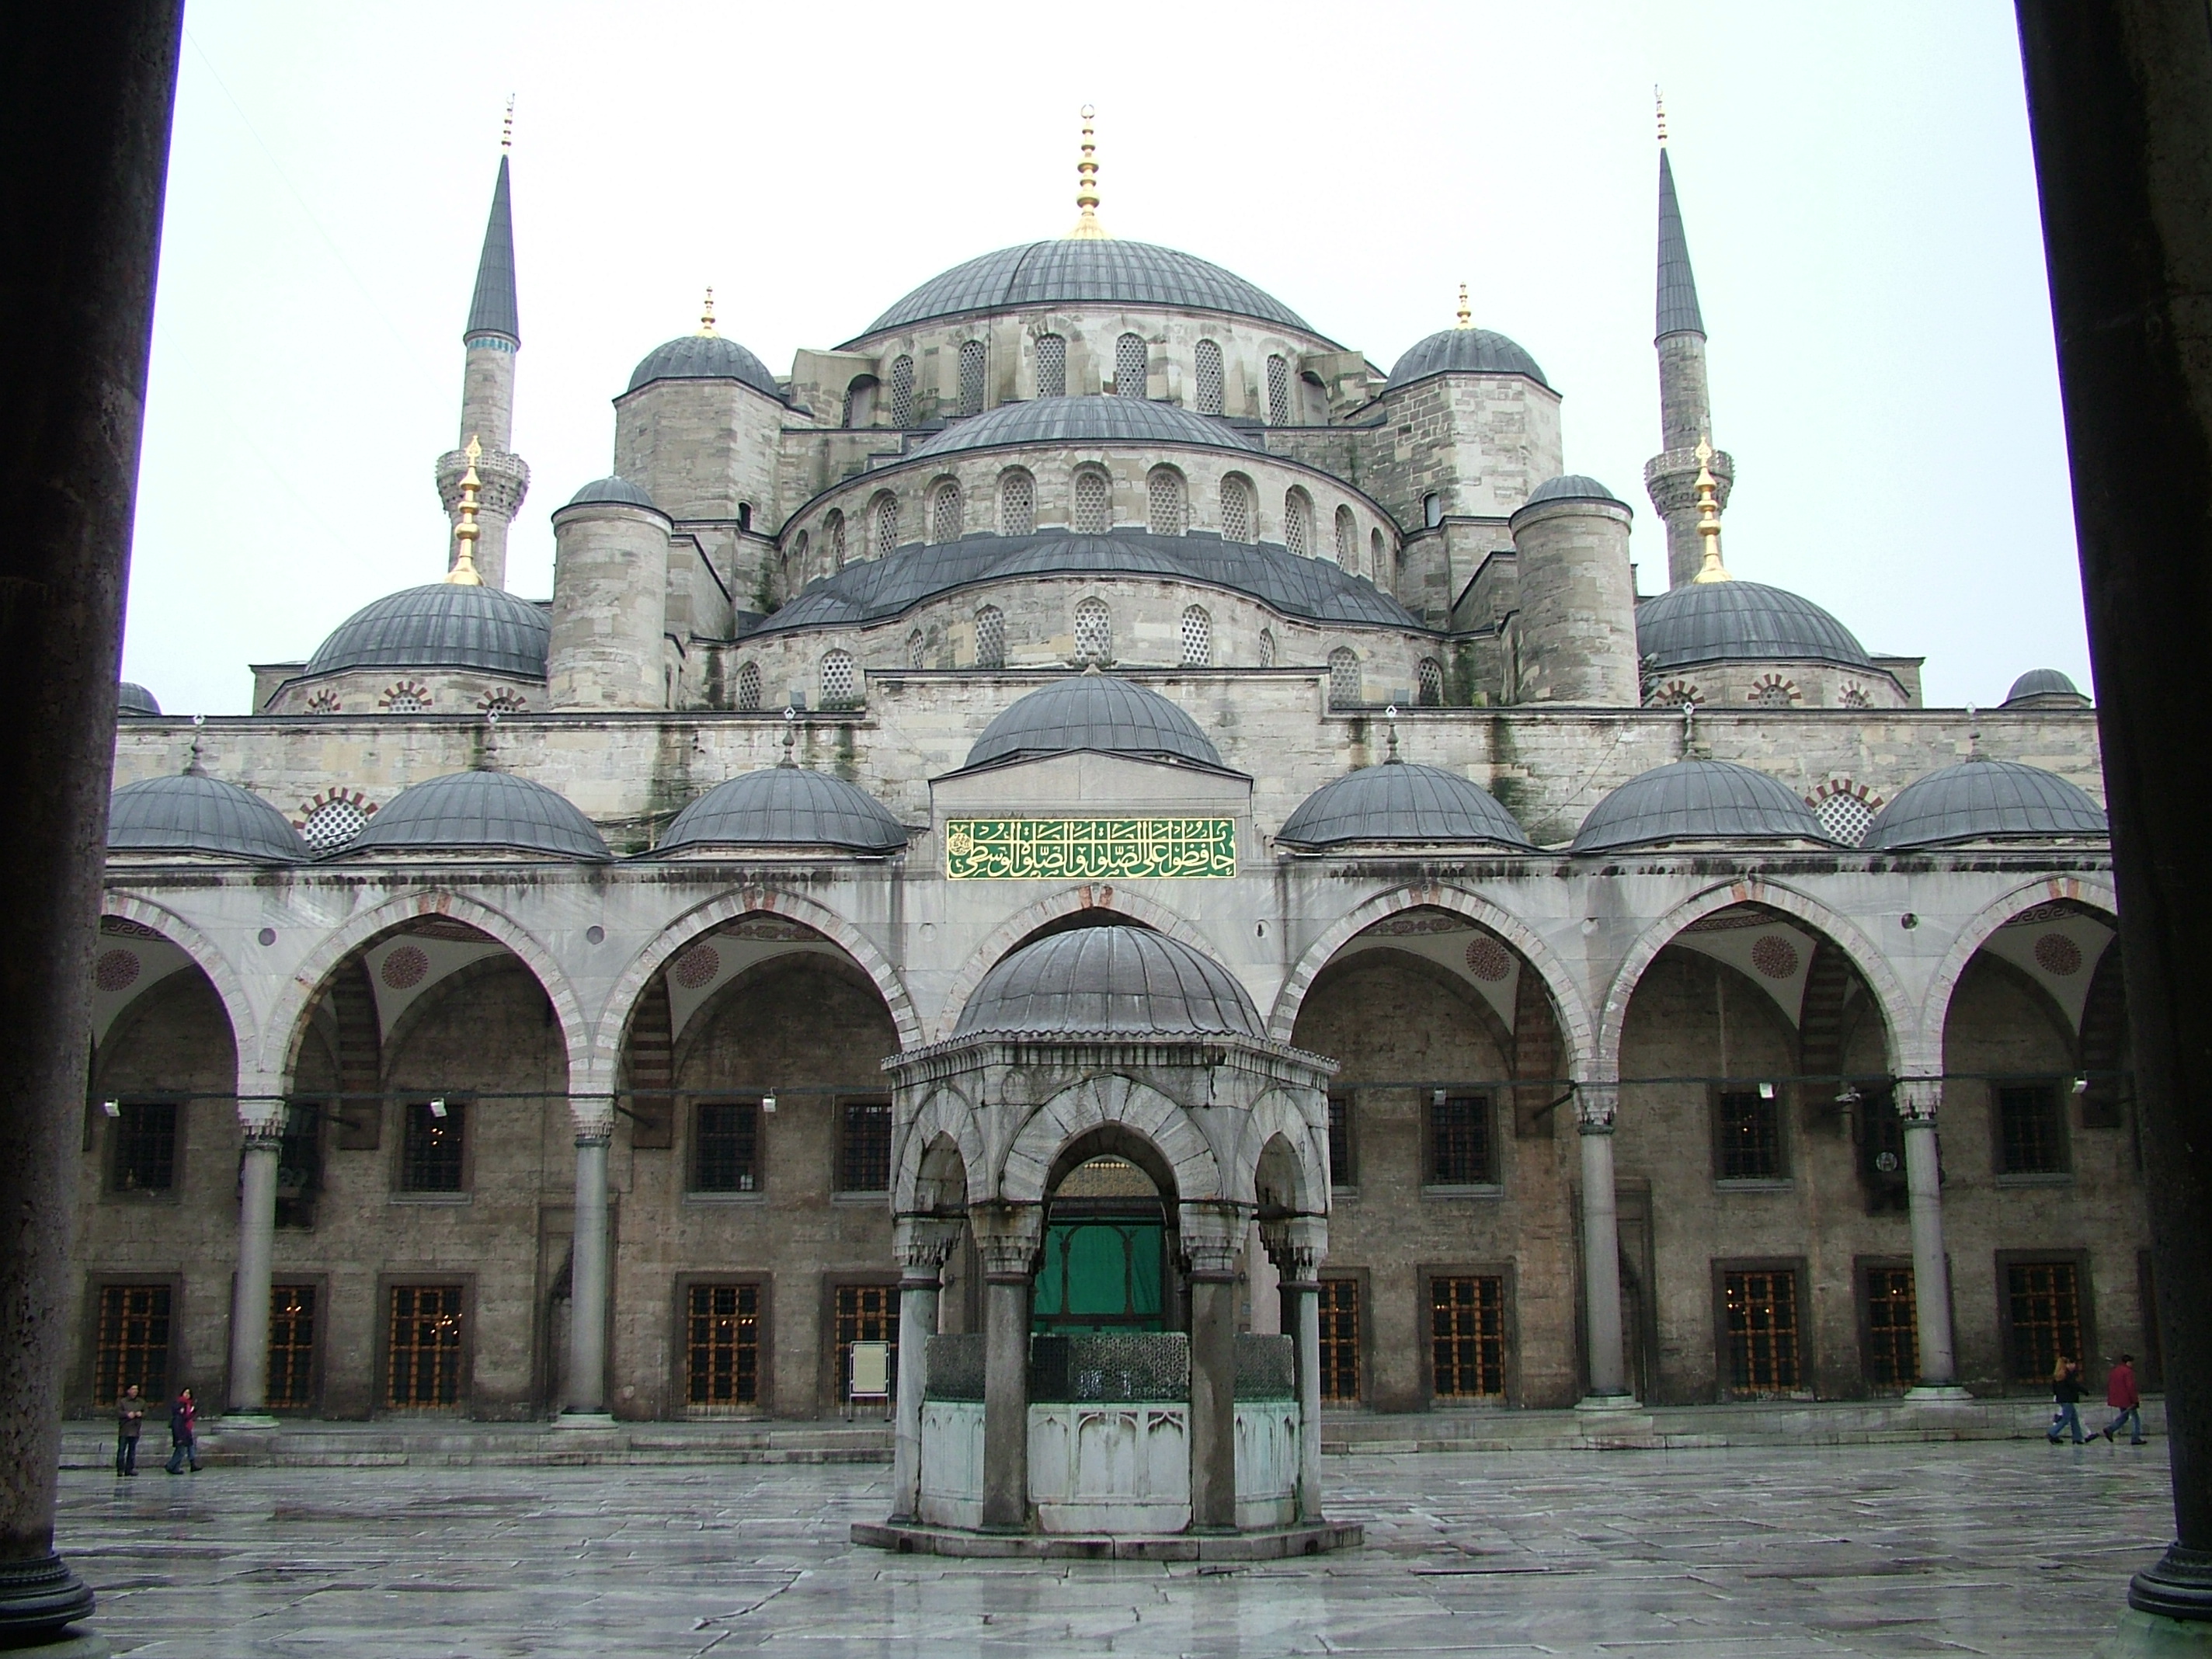 Further afield – Istanbul (2005)